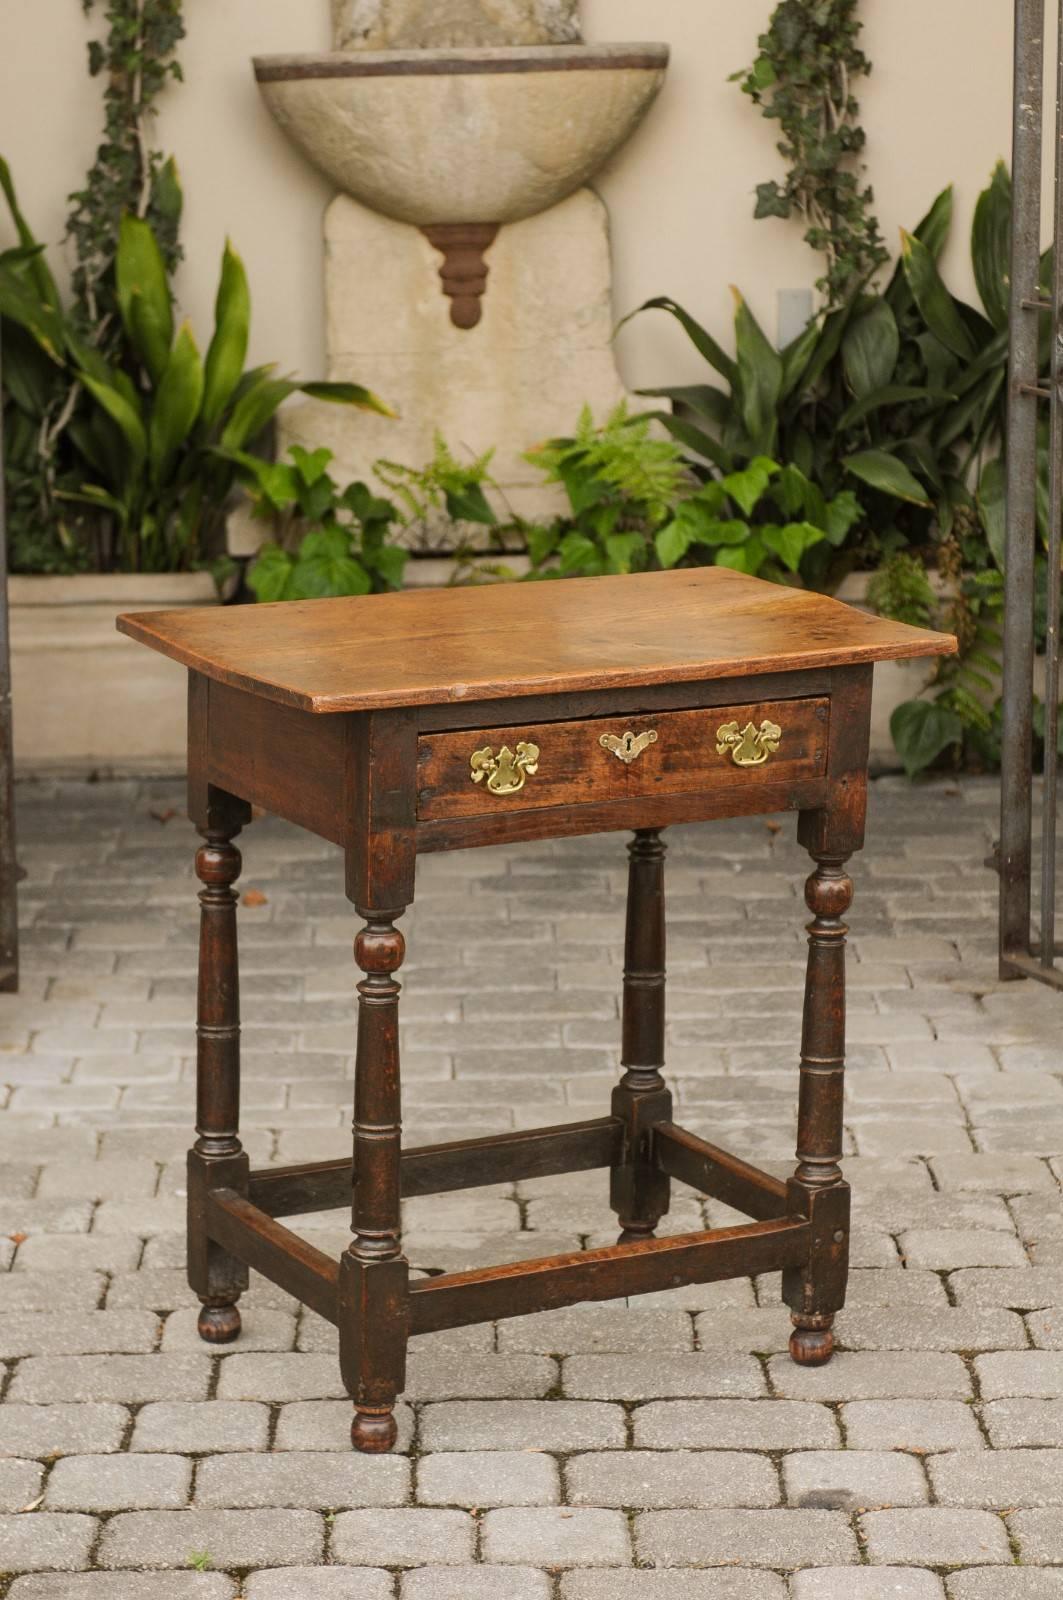 An English oak side table from the mid-19th century, with single drawer, turned legs and side stretcher. This English oak side table features a rectangular top sitting above a single drawer. This drawer is grooved for the runner and adorned with